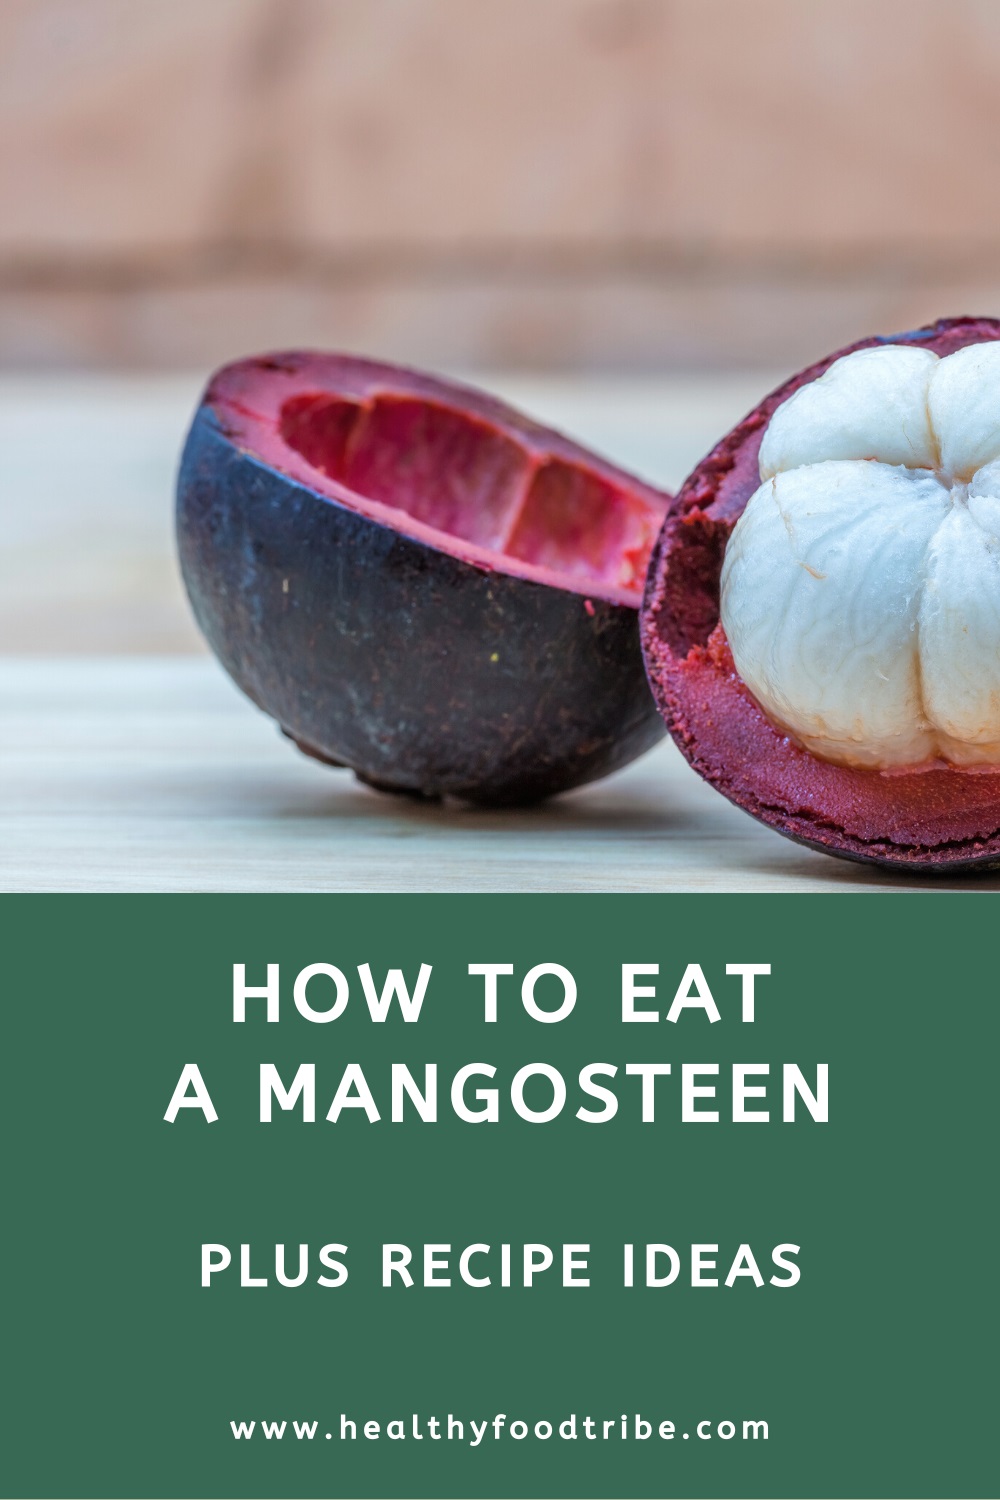 How to cut and eat a mangosteen fruit (plus recipe ideas)